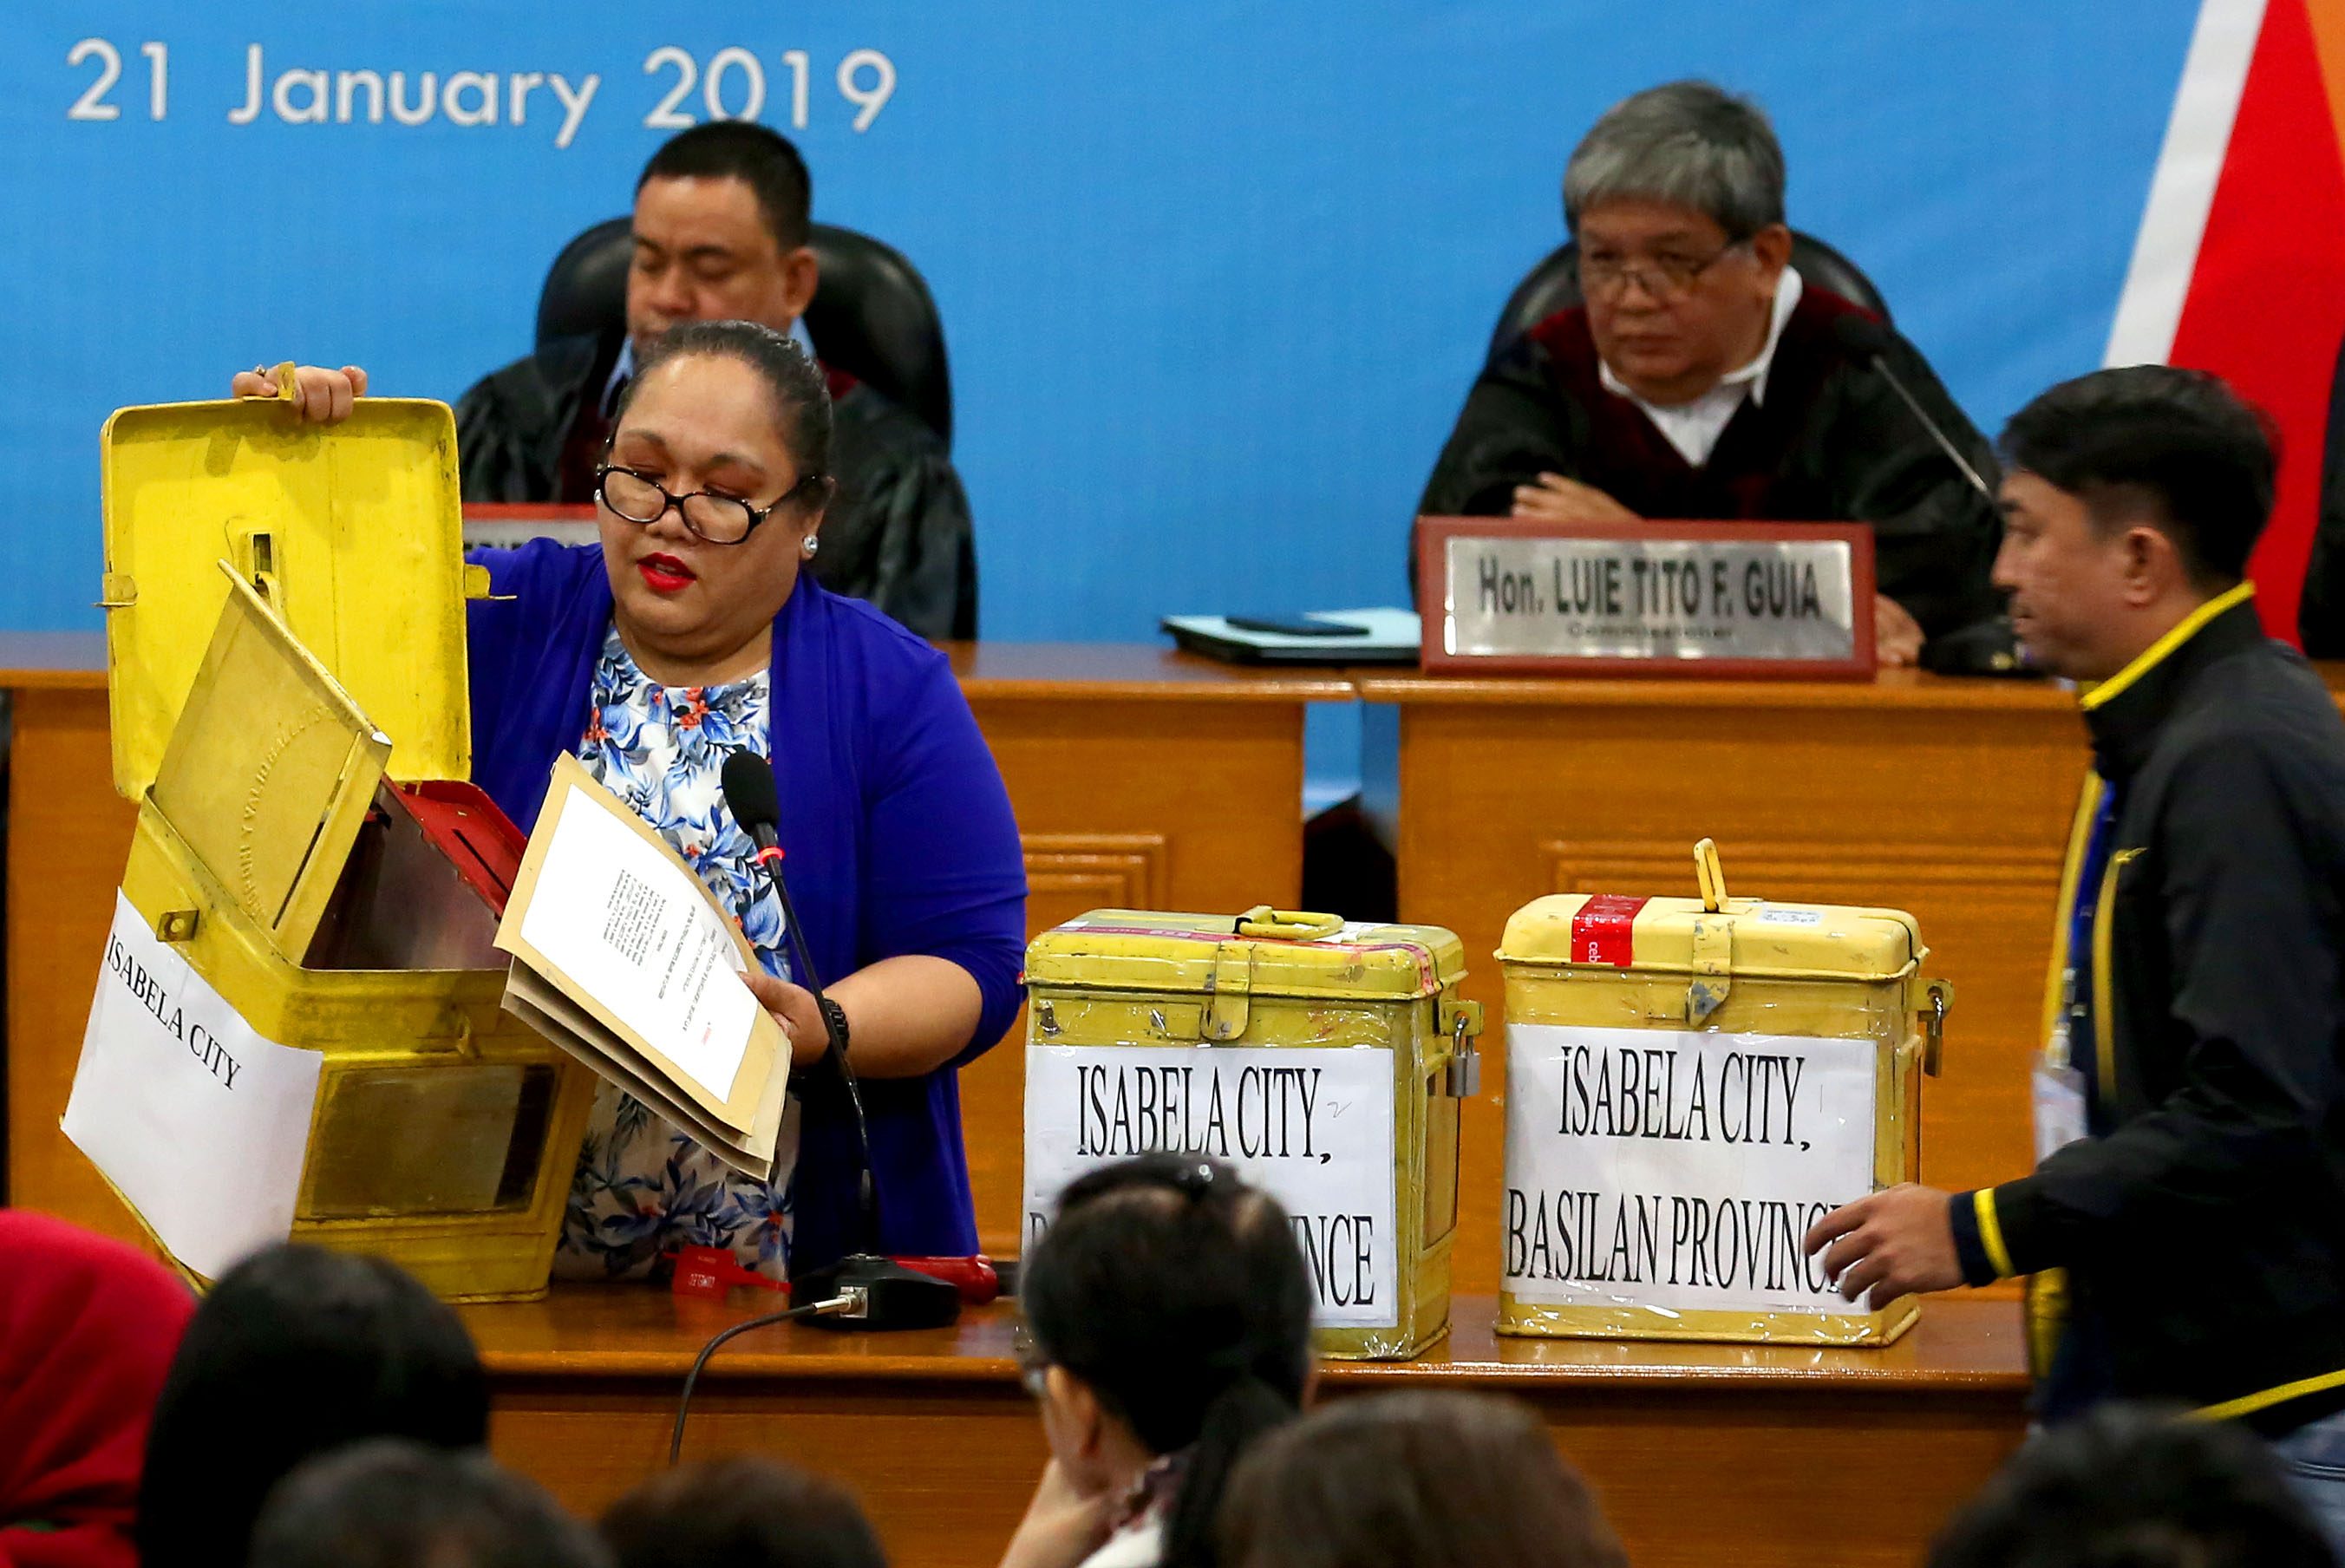 BANGSAMORO PLEBISCITE. The ballot boxes containing election results from Isabela City, Basilan, are processed during the canvassing of Bangsamoro plebiscite results in Intramuros, Manila, on January 25, 2019. Photo by Inoue Jaena/Rappler  